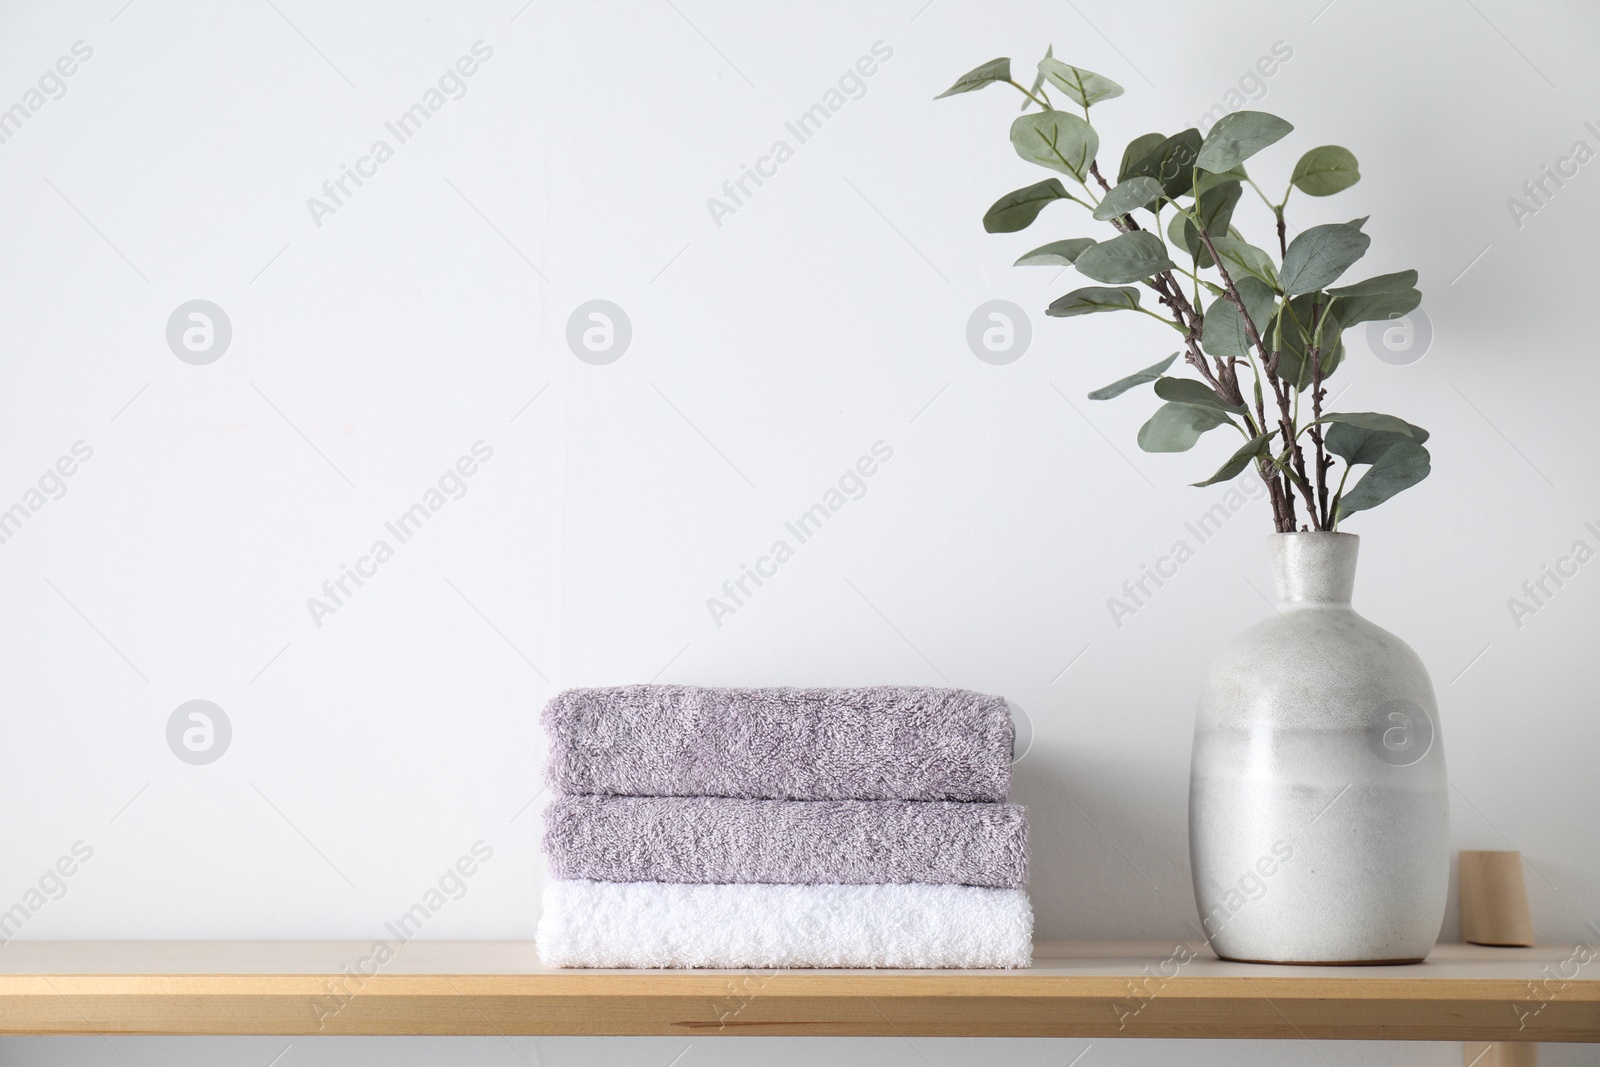 Photo of Stacked terry towels and eucalyptus branches in vase on wooden shelf near white wall, space for text